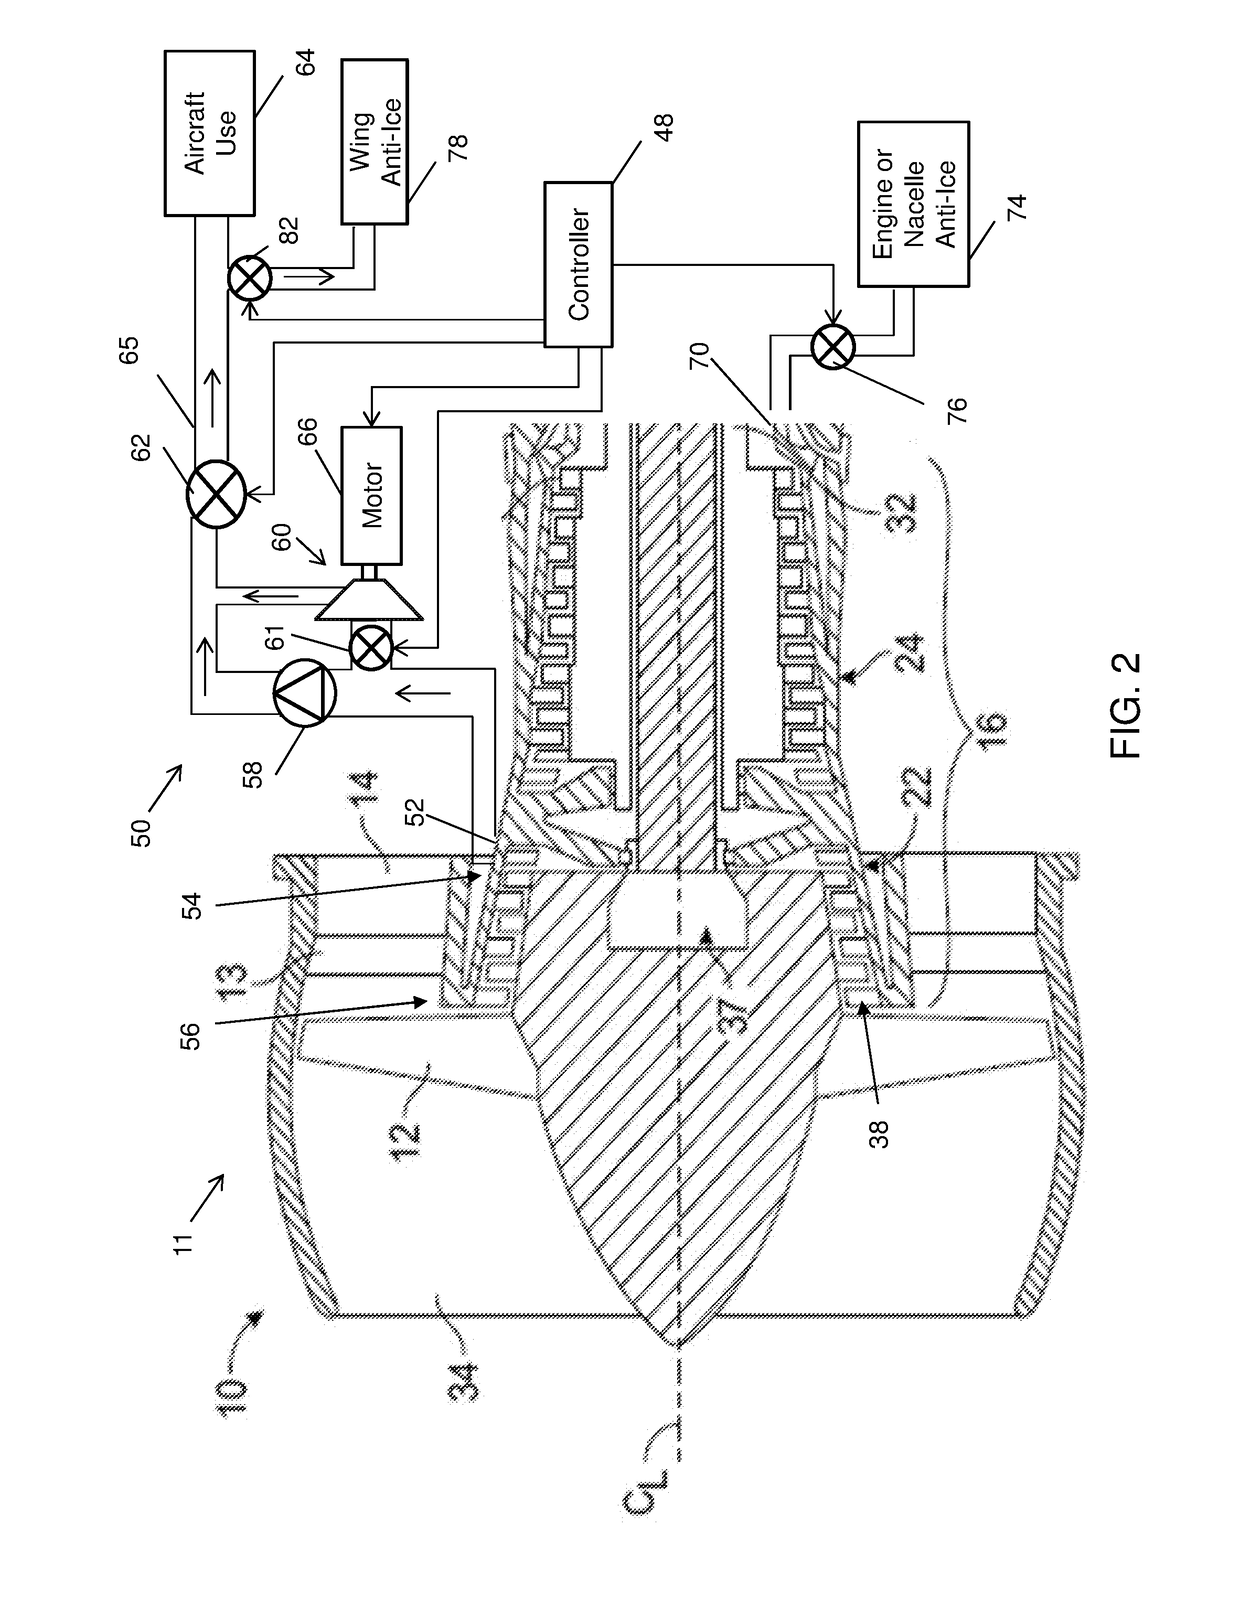 Engine bleed system with motorized compressor